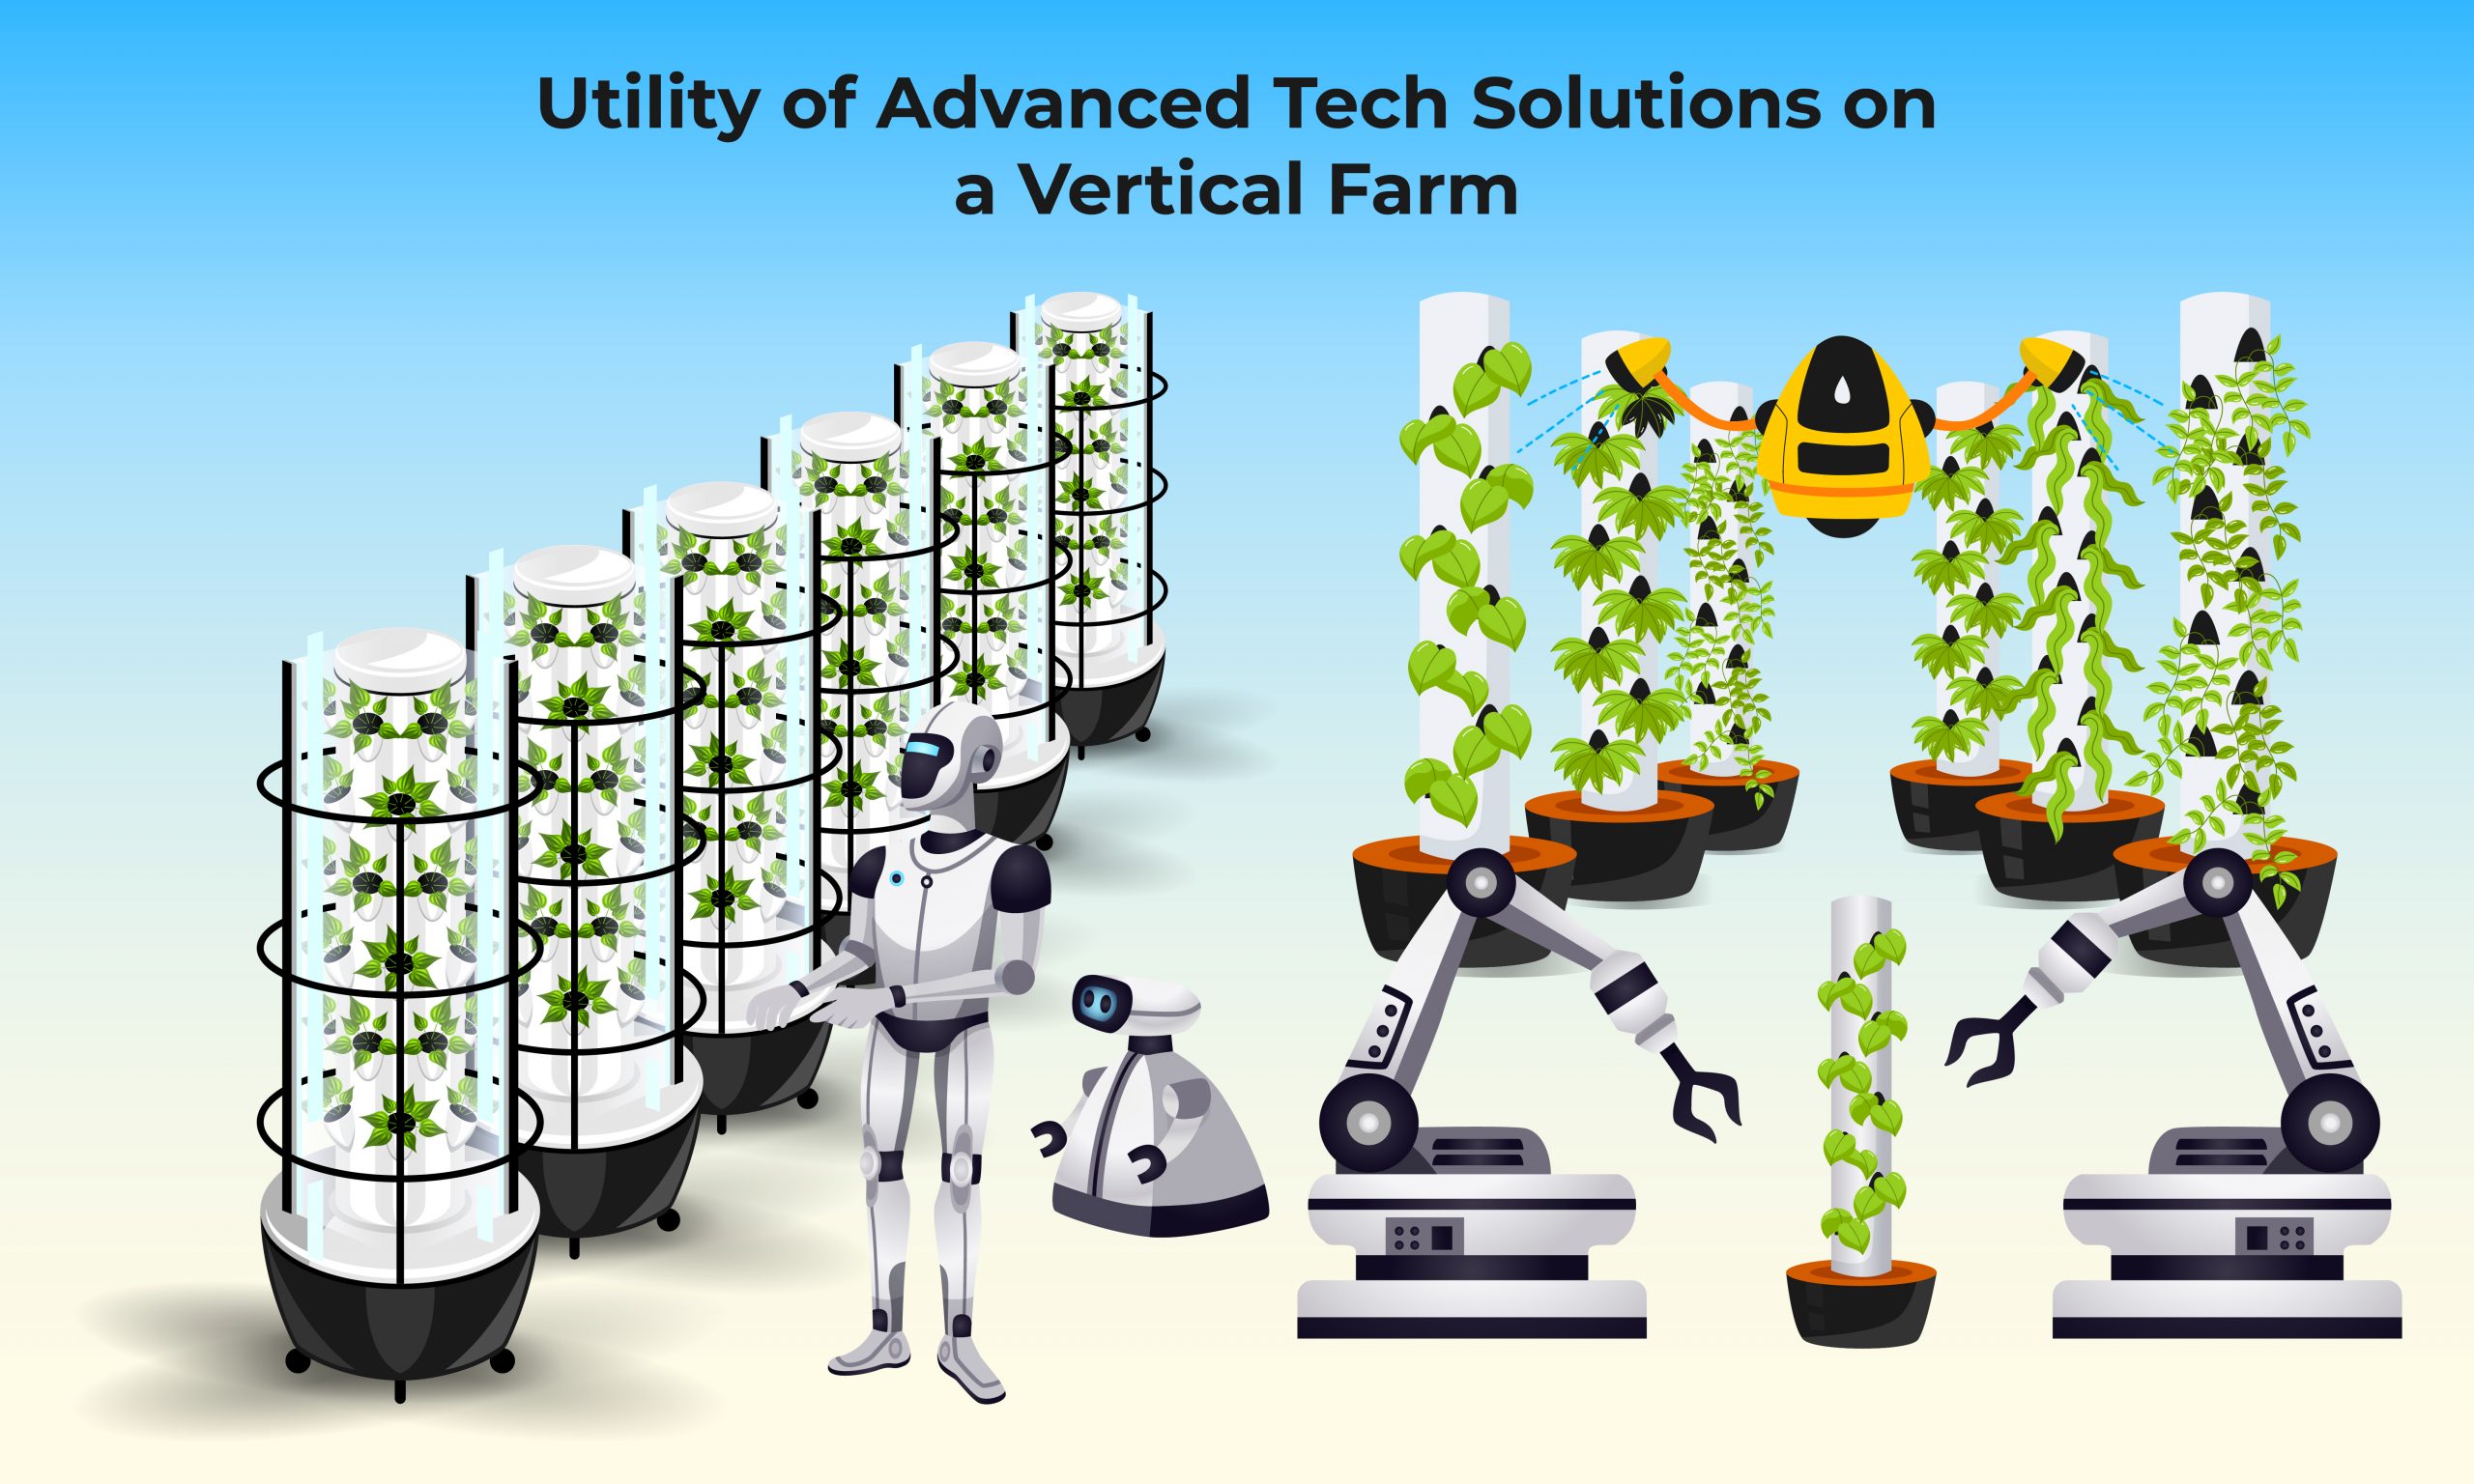 Utility of advanced tech solutions on a vertical farm